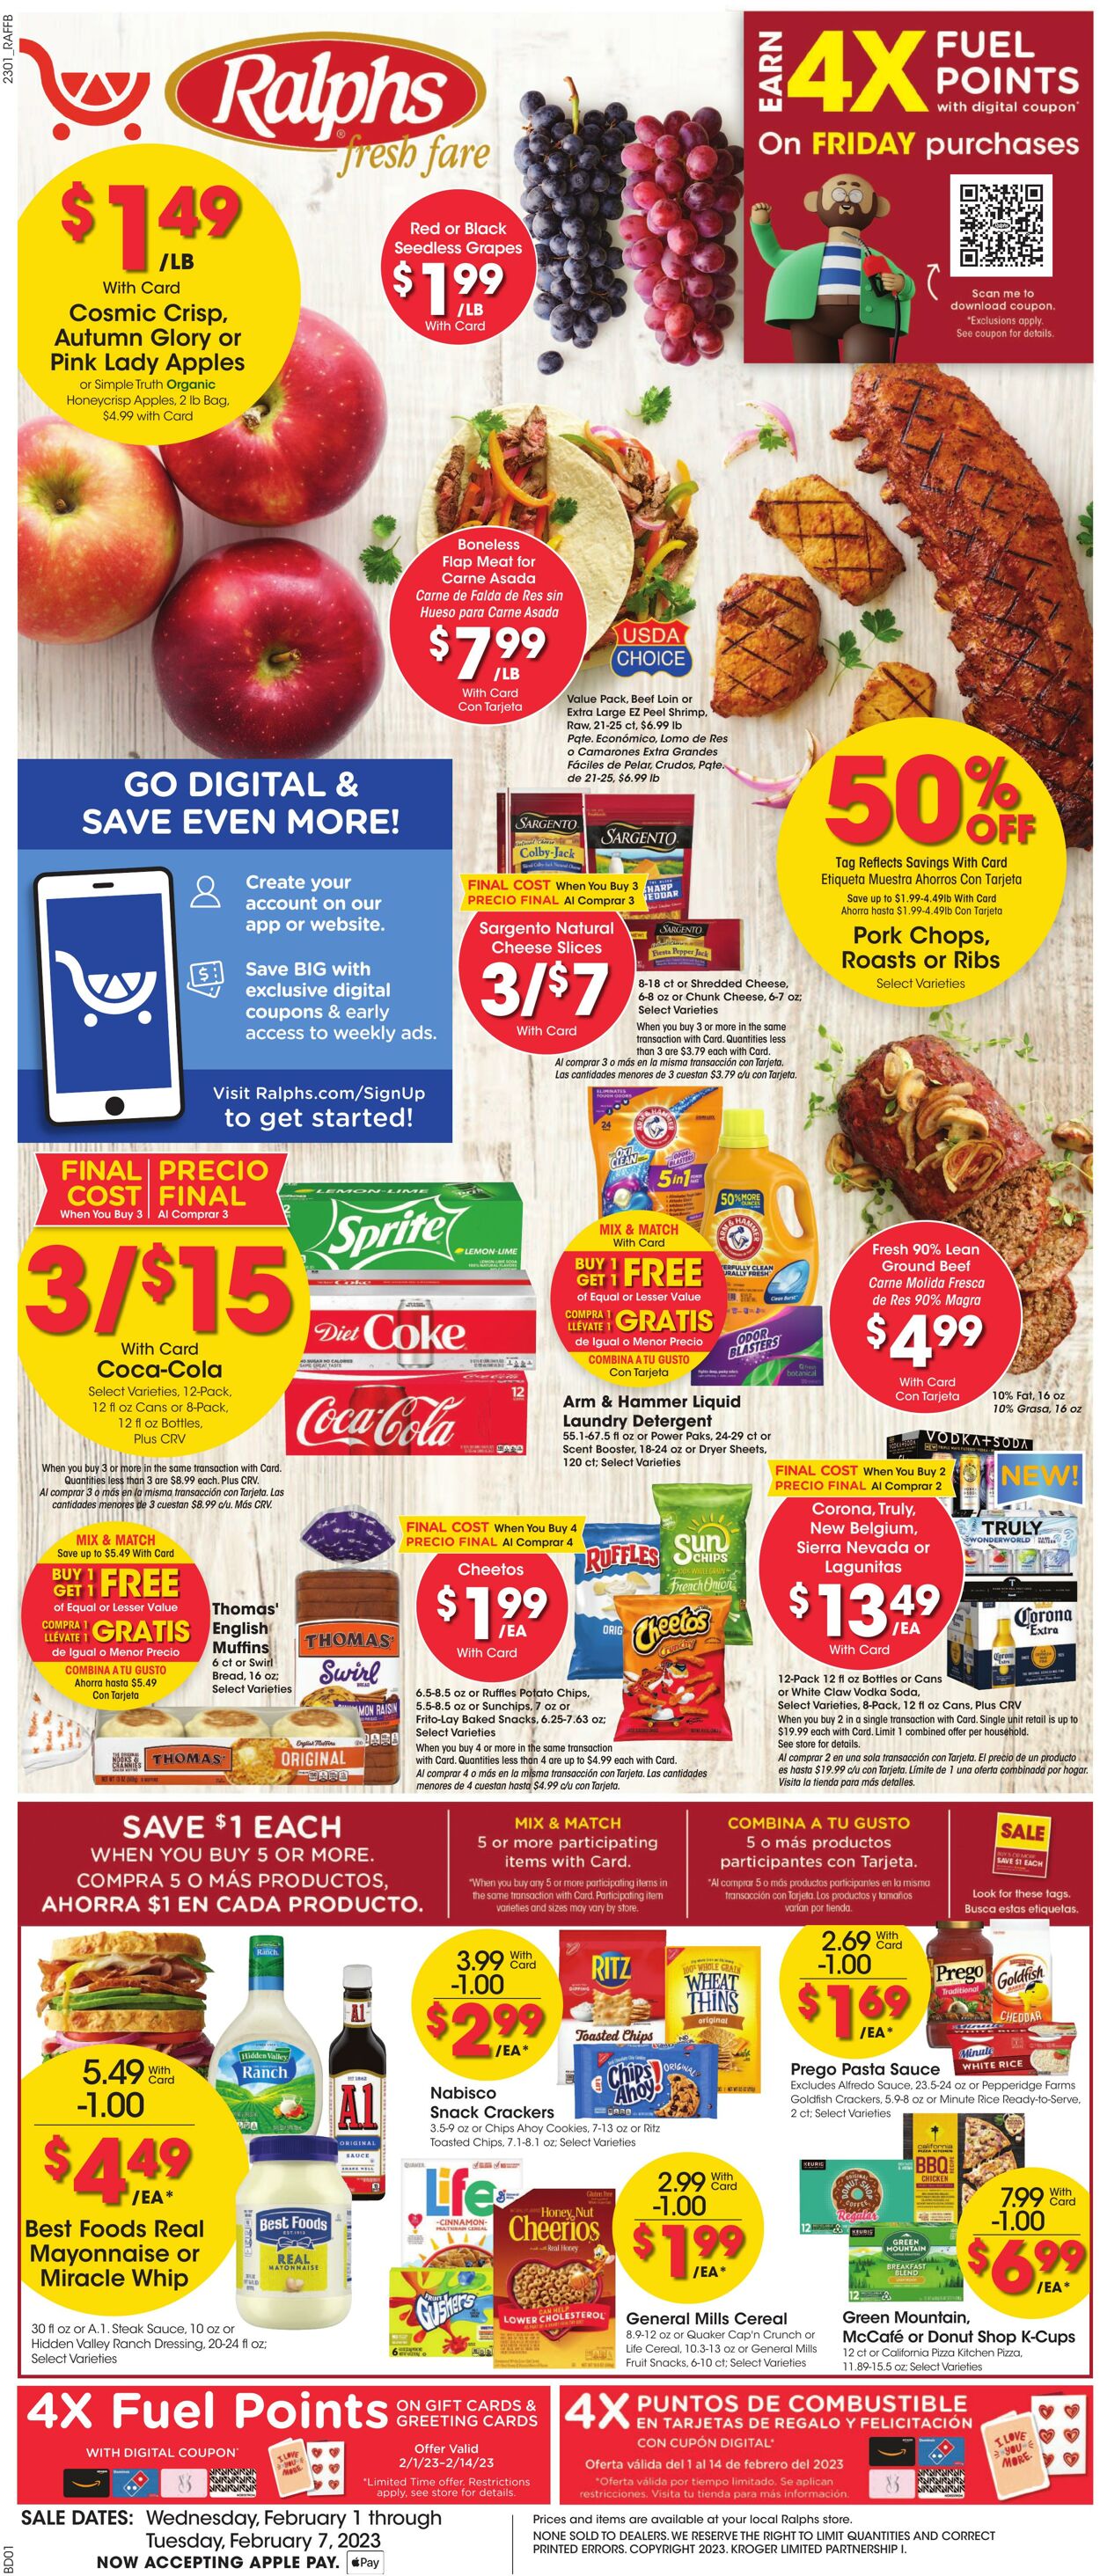 Ralphs Promotional weekly ads